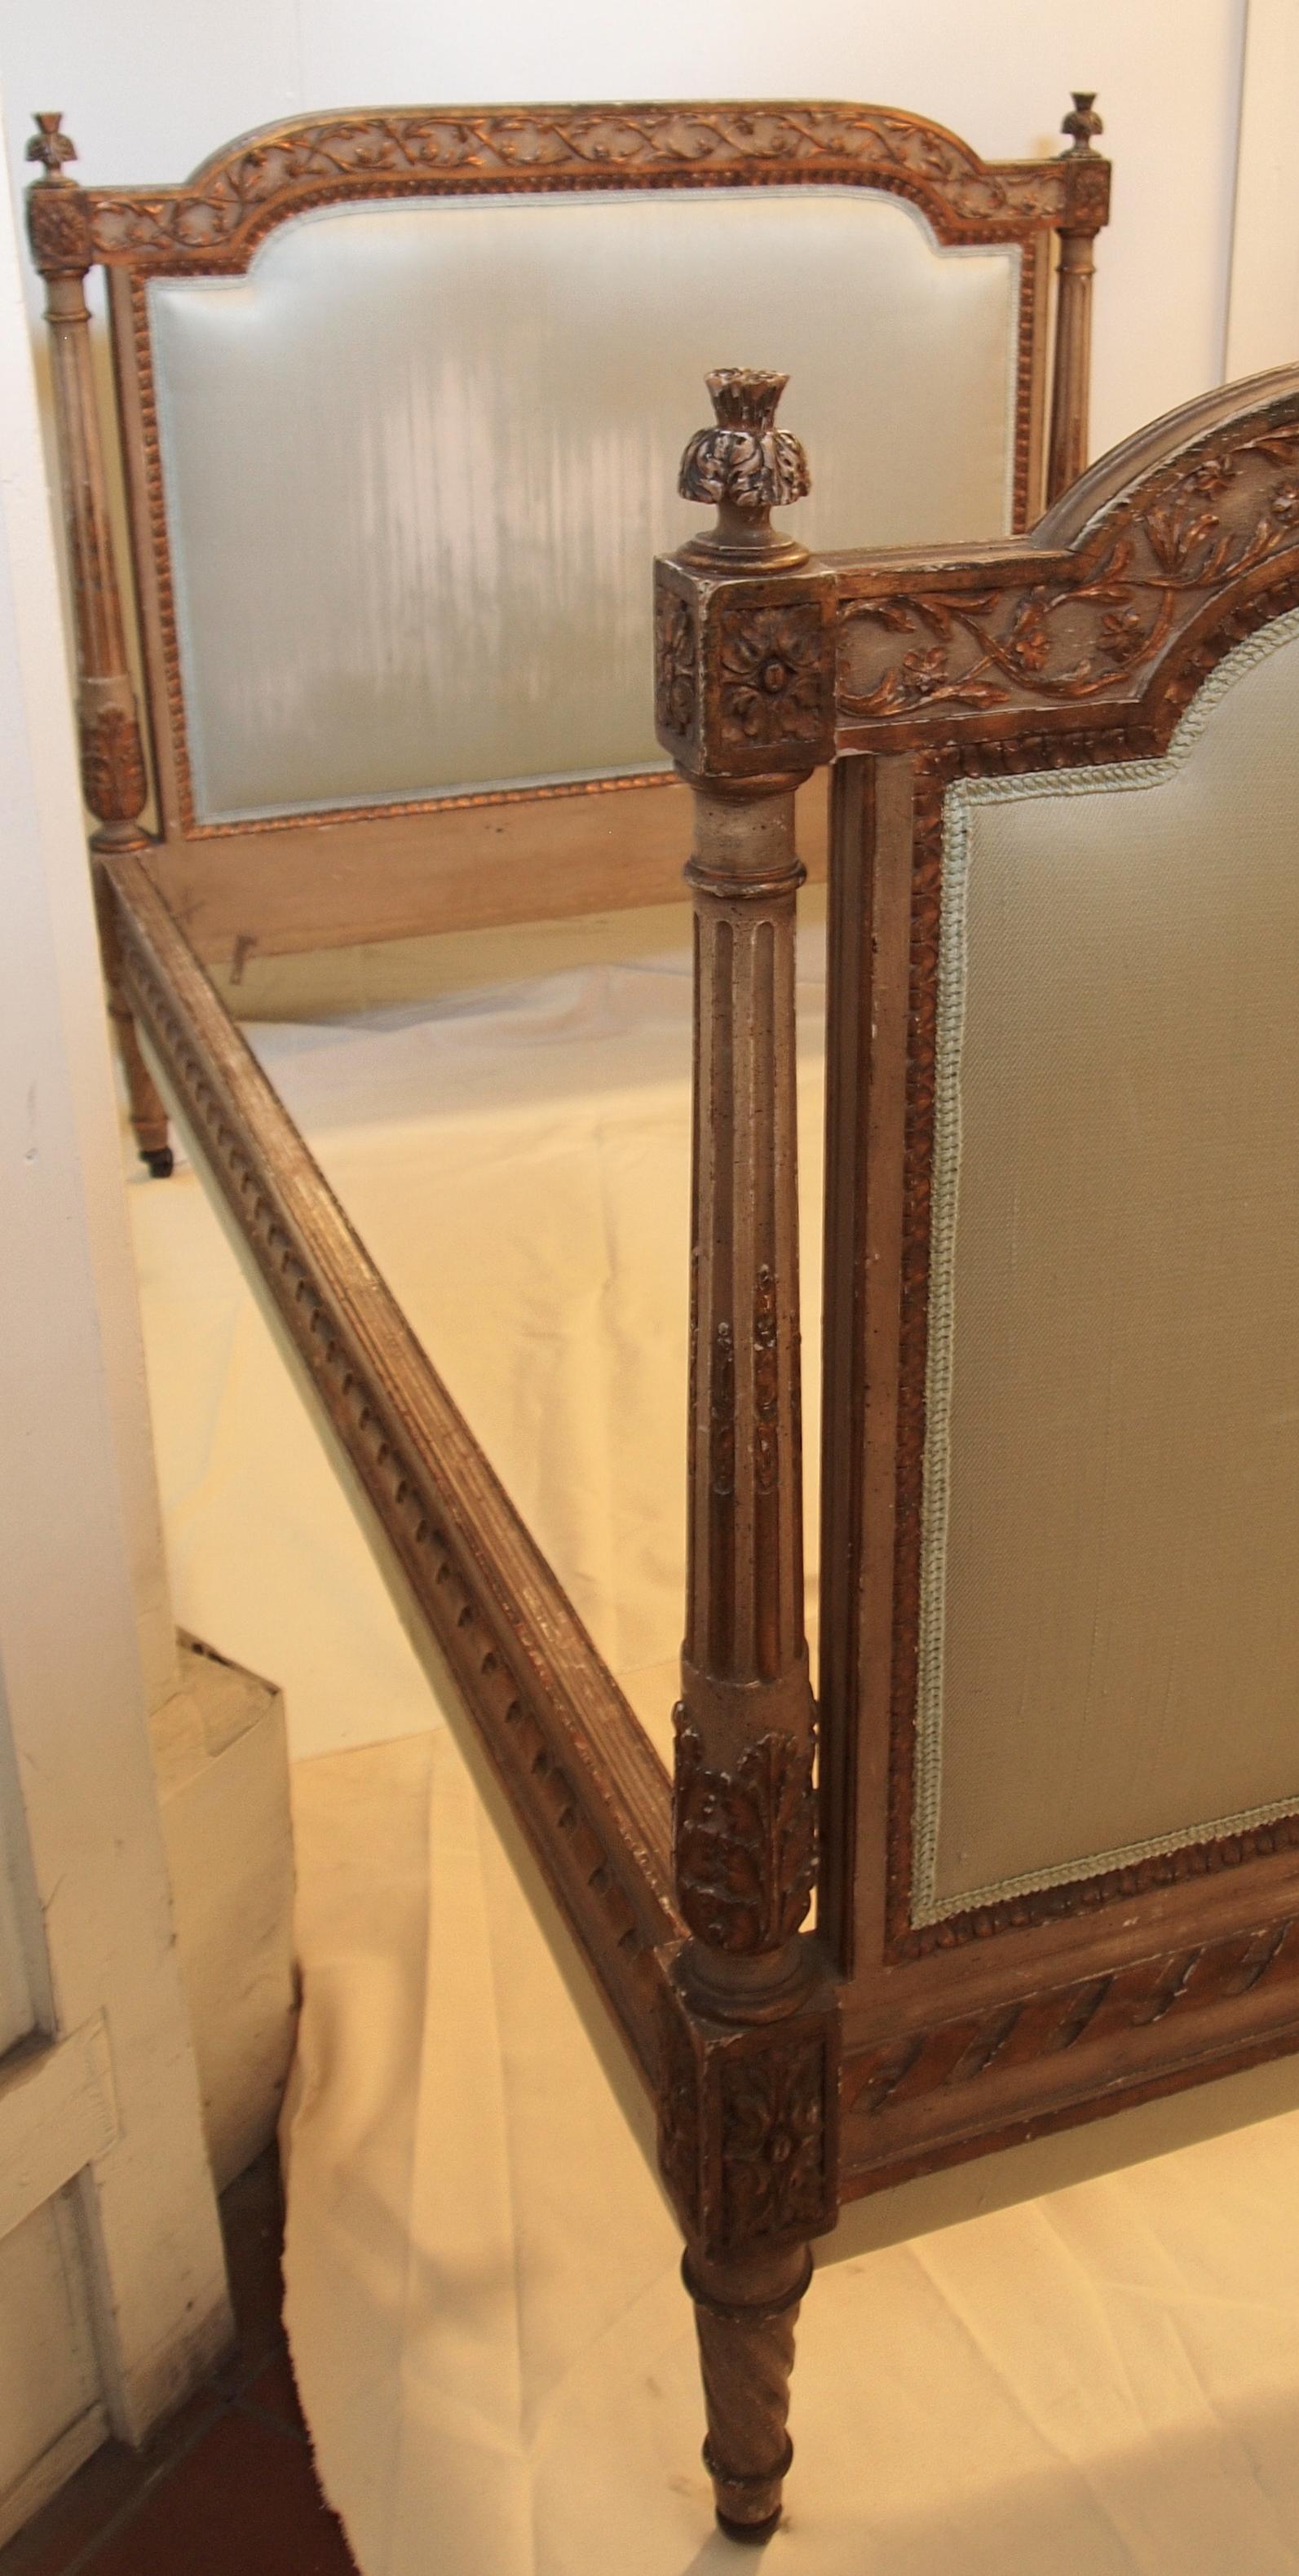 Carved Louis XVl Style Parcel-Gilt and Painted Day Bed